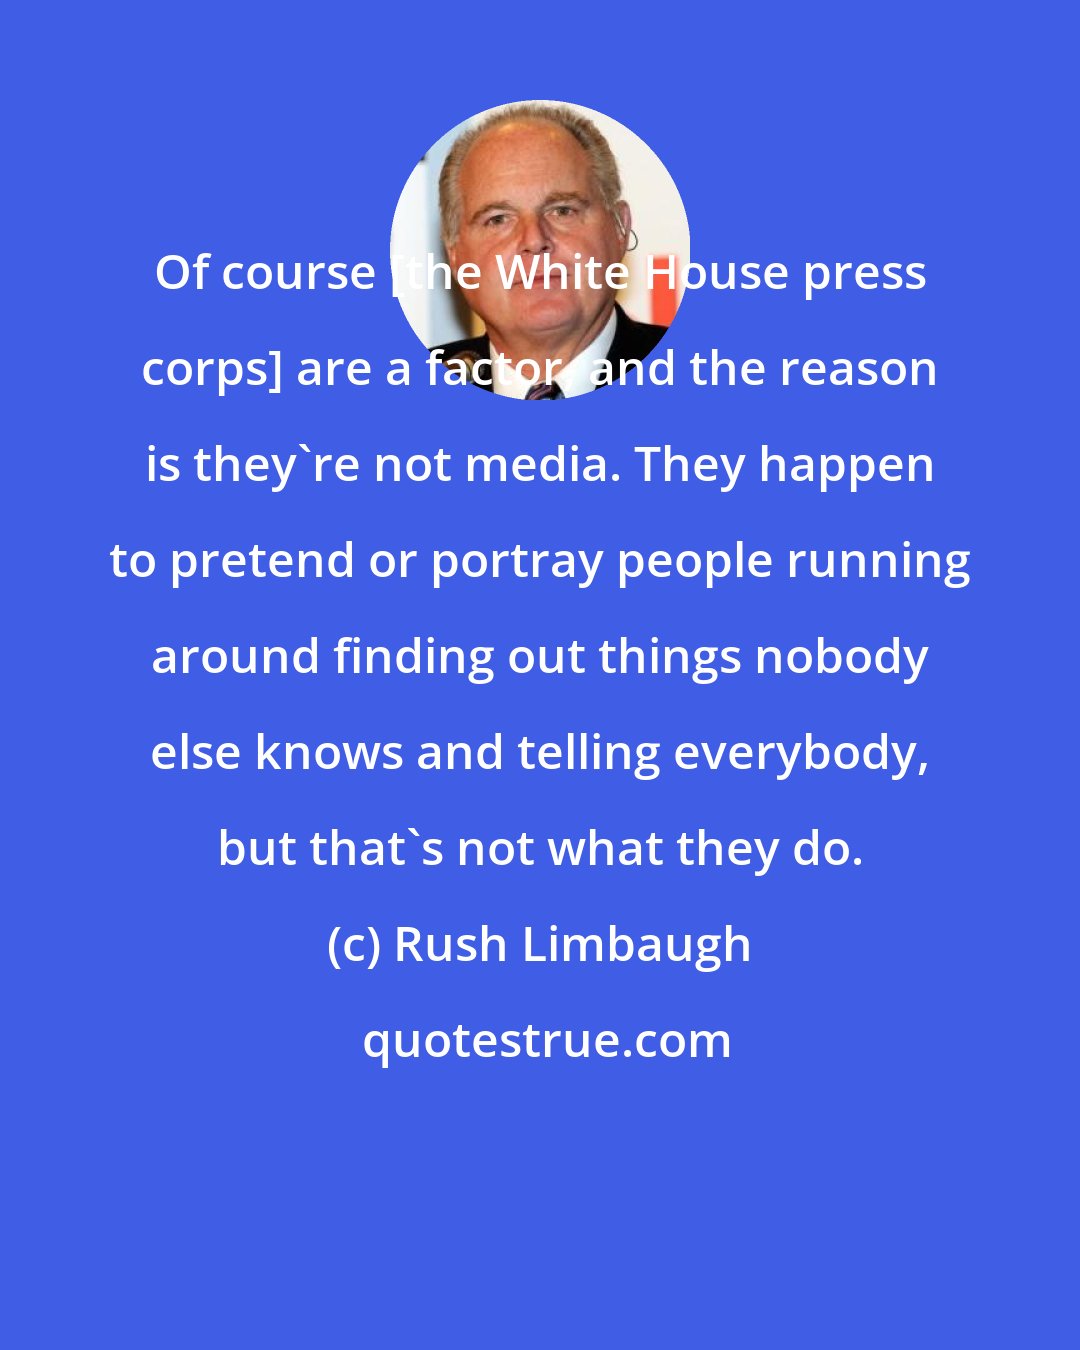 Rush Limbaugh: Of course [the White House press corps] are a factor, and the reason is they're not media. They happen to pretend or portray people running around finding out things nobody else knows and telling everybody, but that's not what they do.